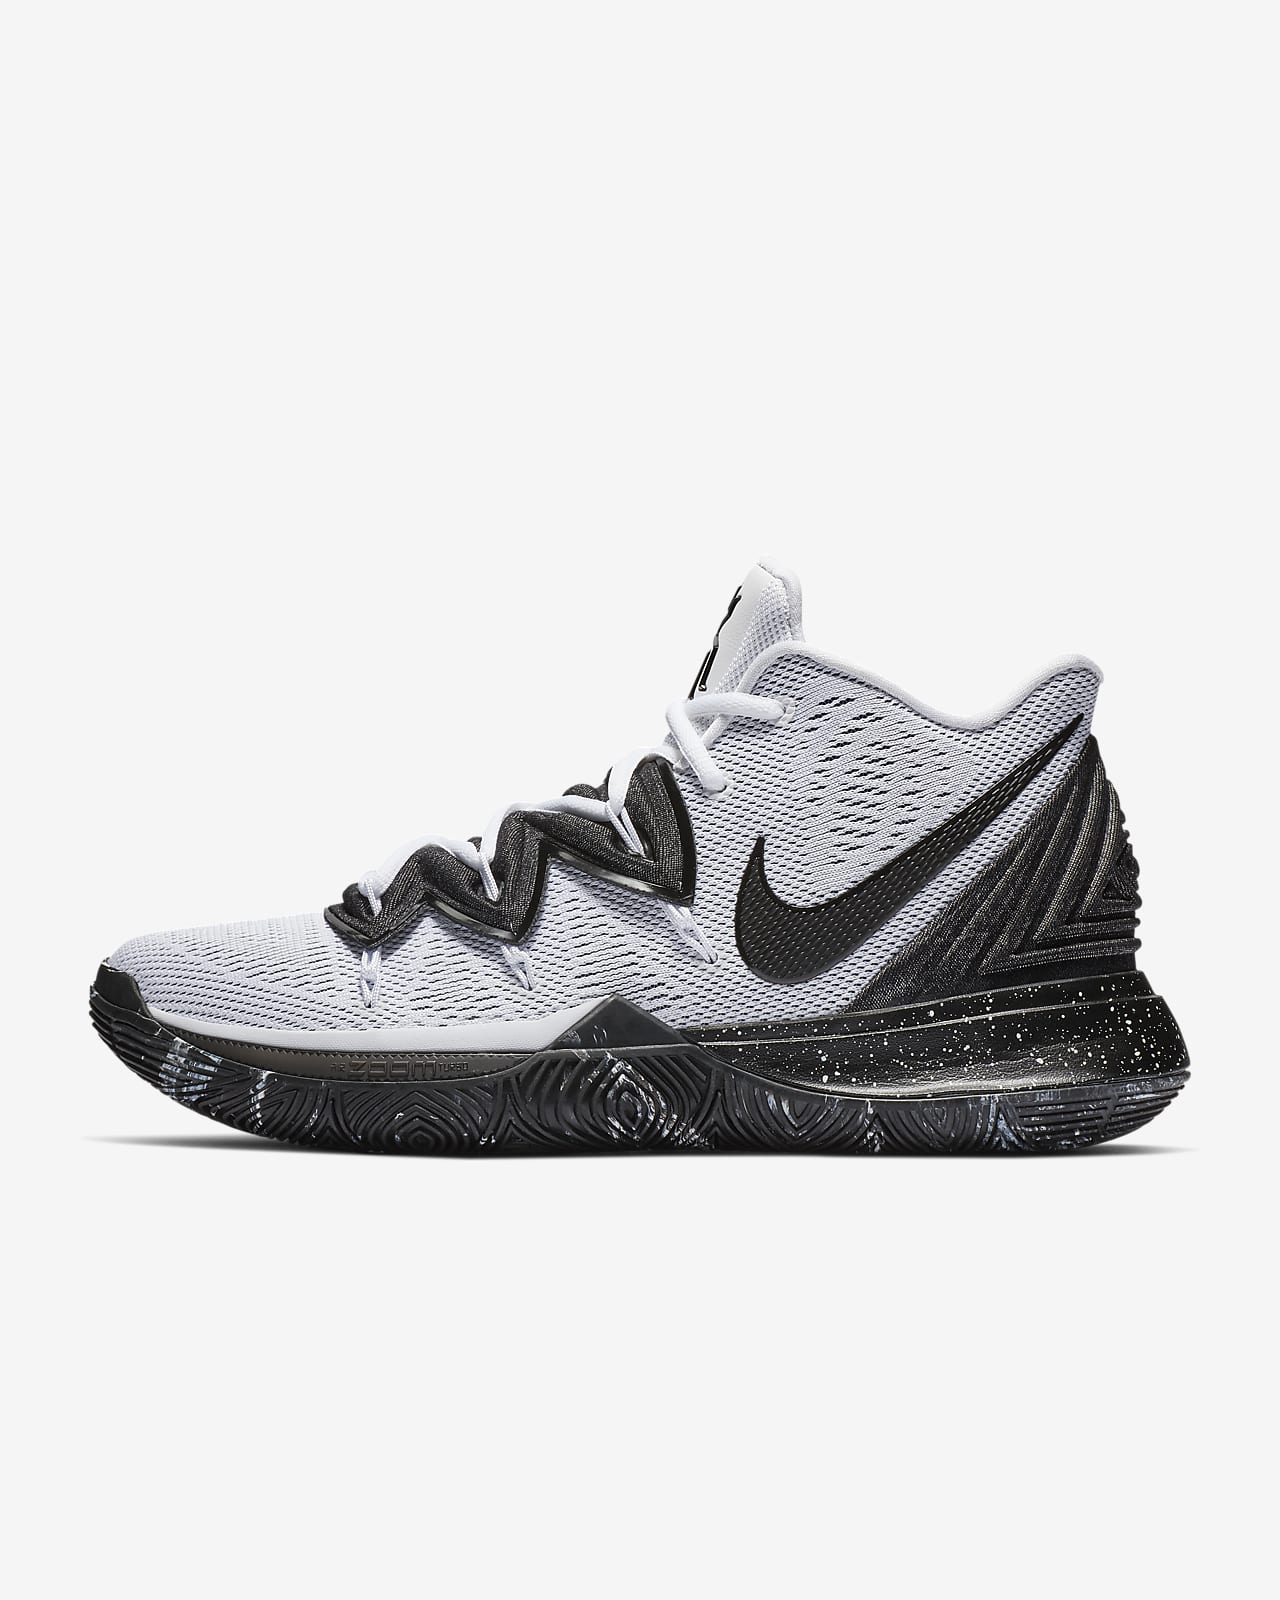 kyrie 5 size fit